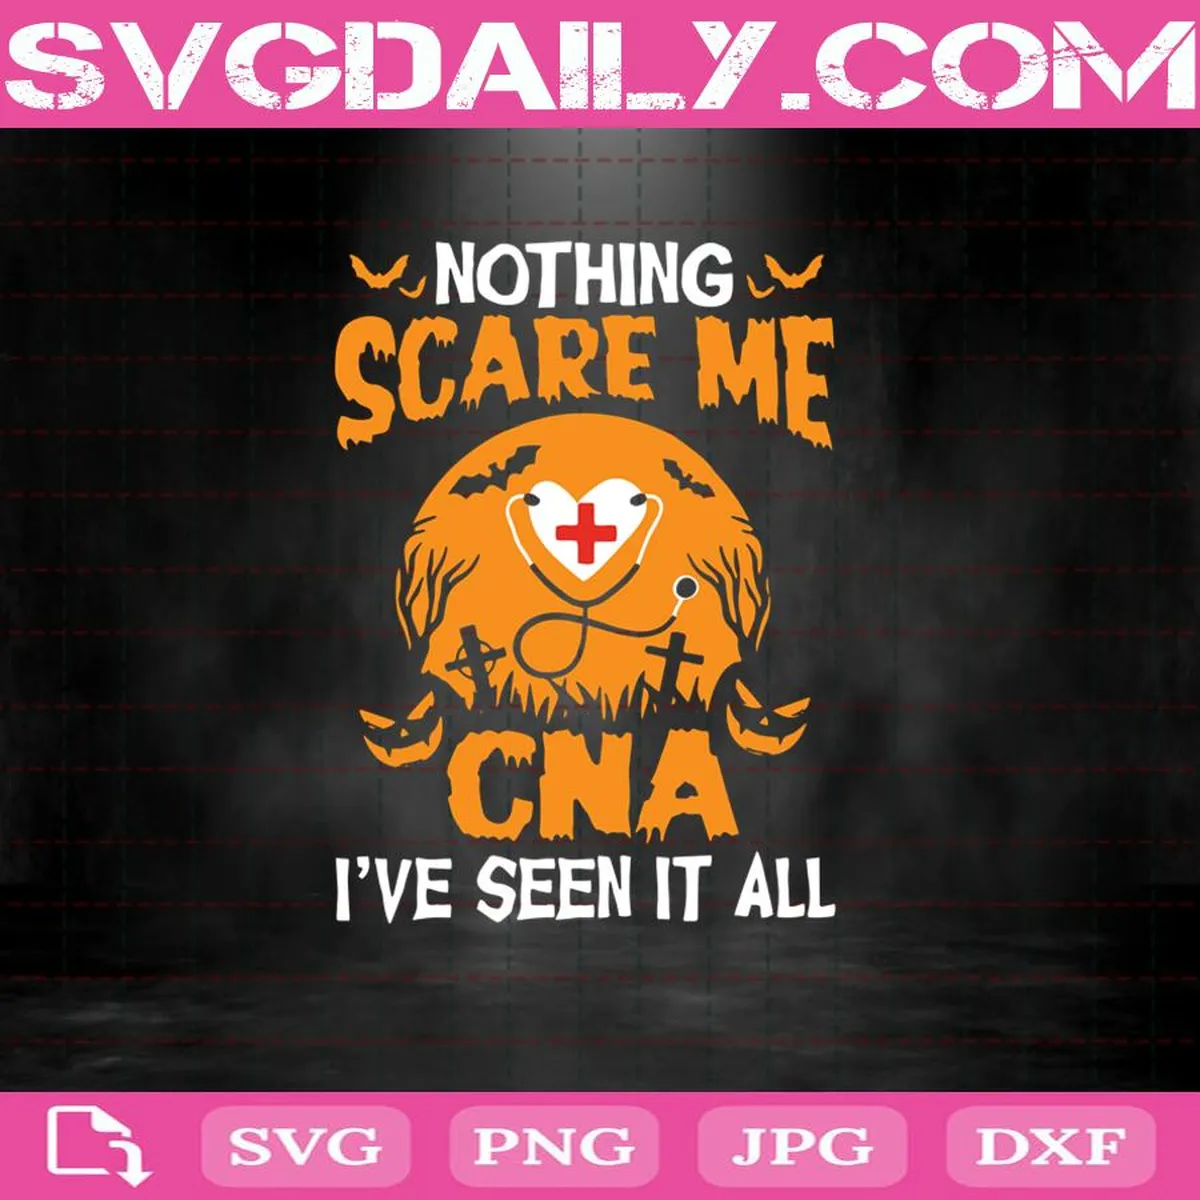 Nothing Scare Me CNA I’ve Seen It All Svg, Halloween Svg, Nurse Svg, Pumpkin Svg, Halloween Svg, Halloween Gift, Happy Halloween Day Svg